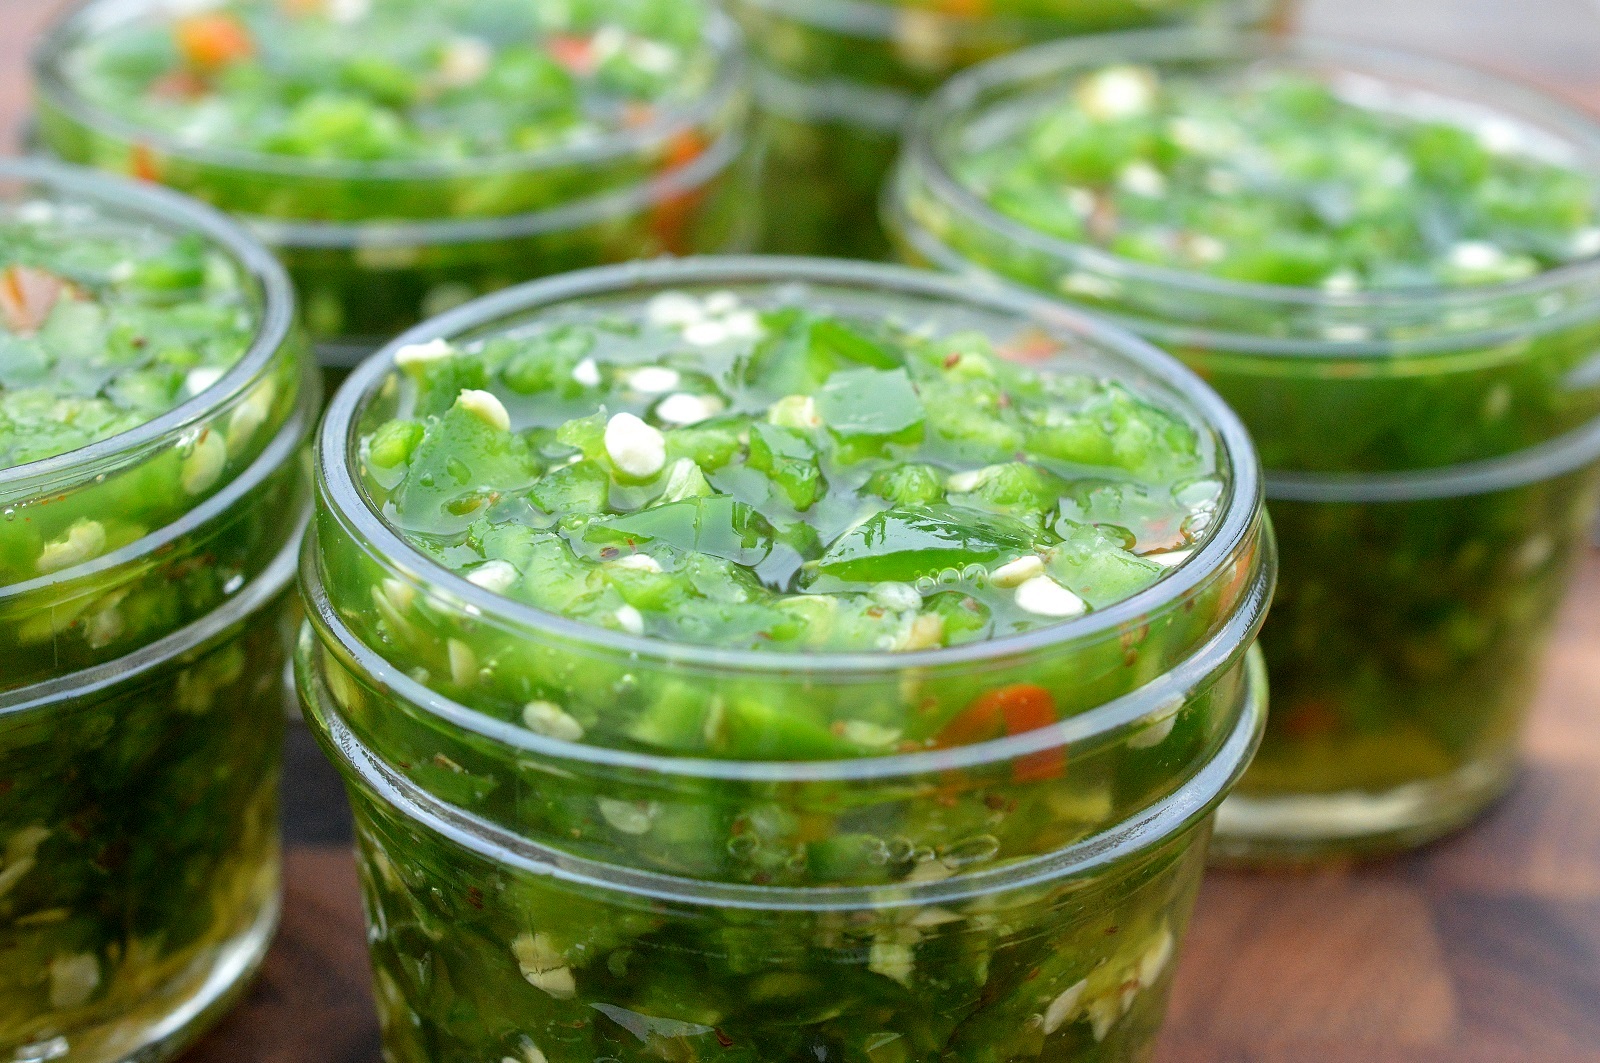 Jalapeno Relish made by quick pickling, ready overnight and lasts for weeks. Makes a great food gift! 